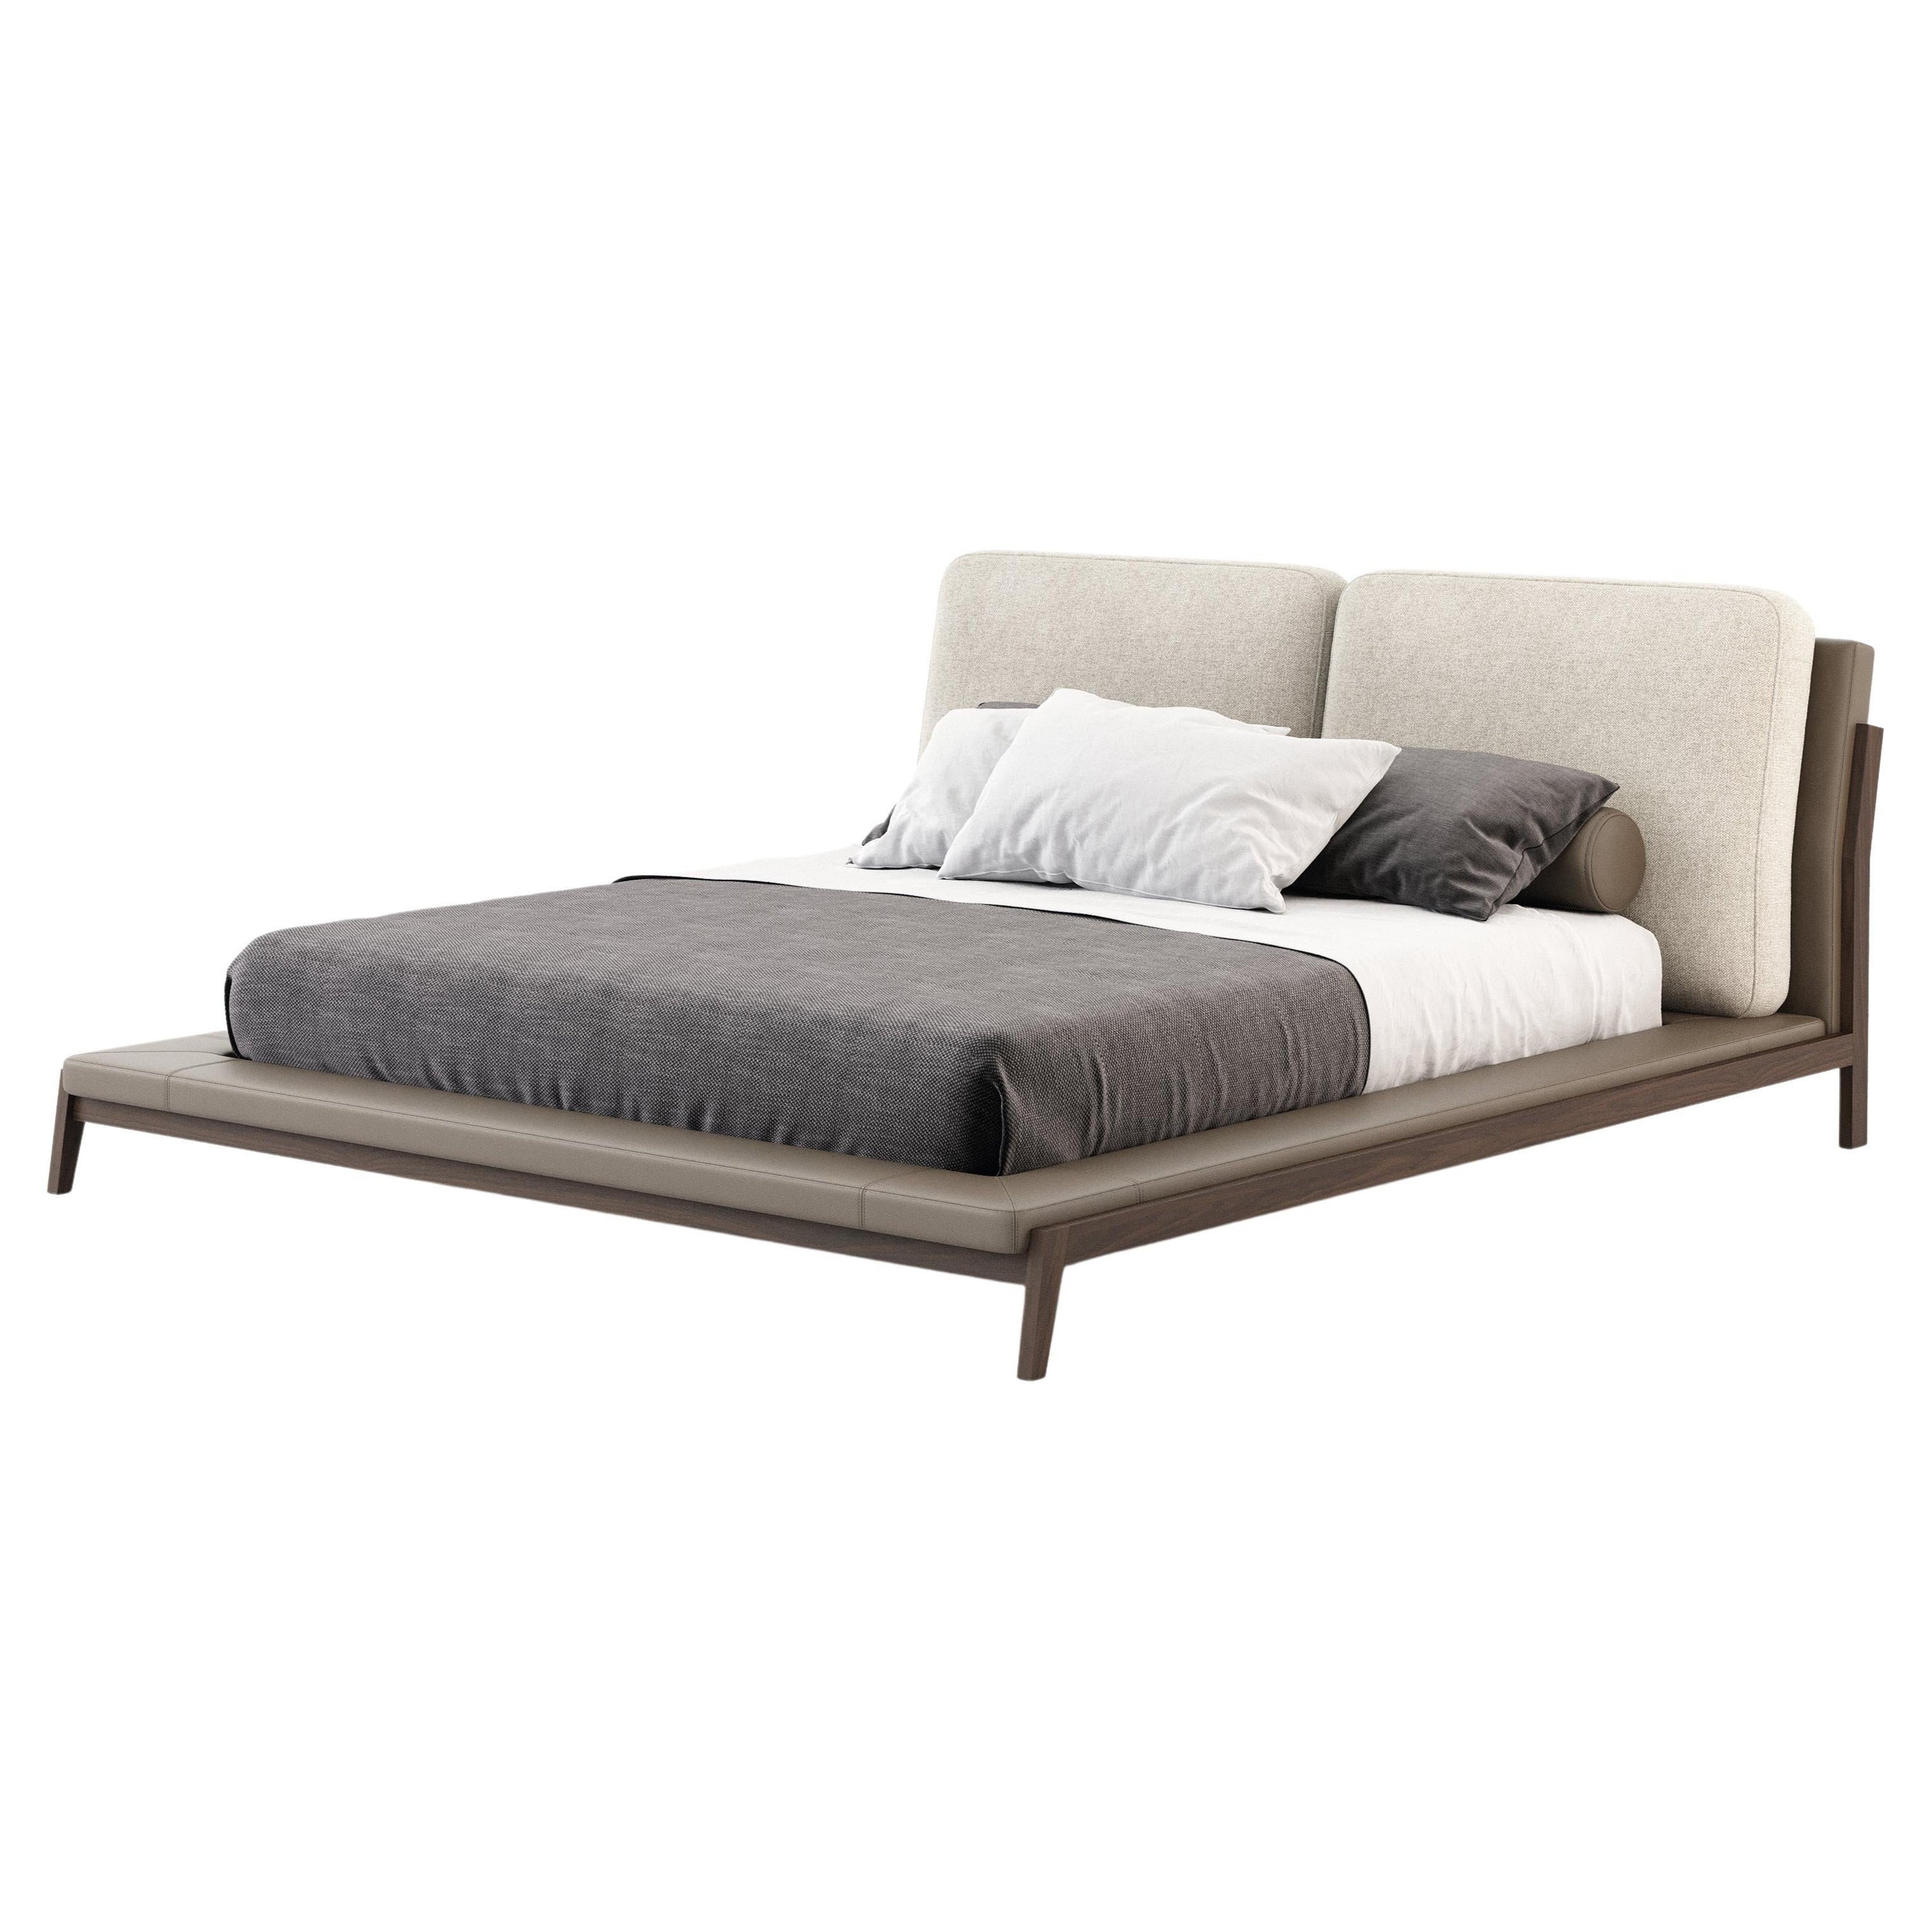 King Modern Milos Bed Made with Walnut and Leather, Handmade by Stylish Club